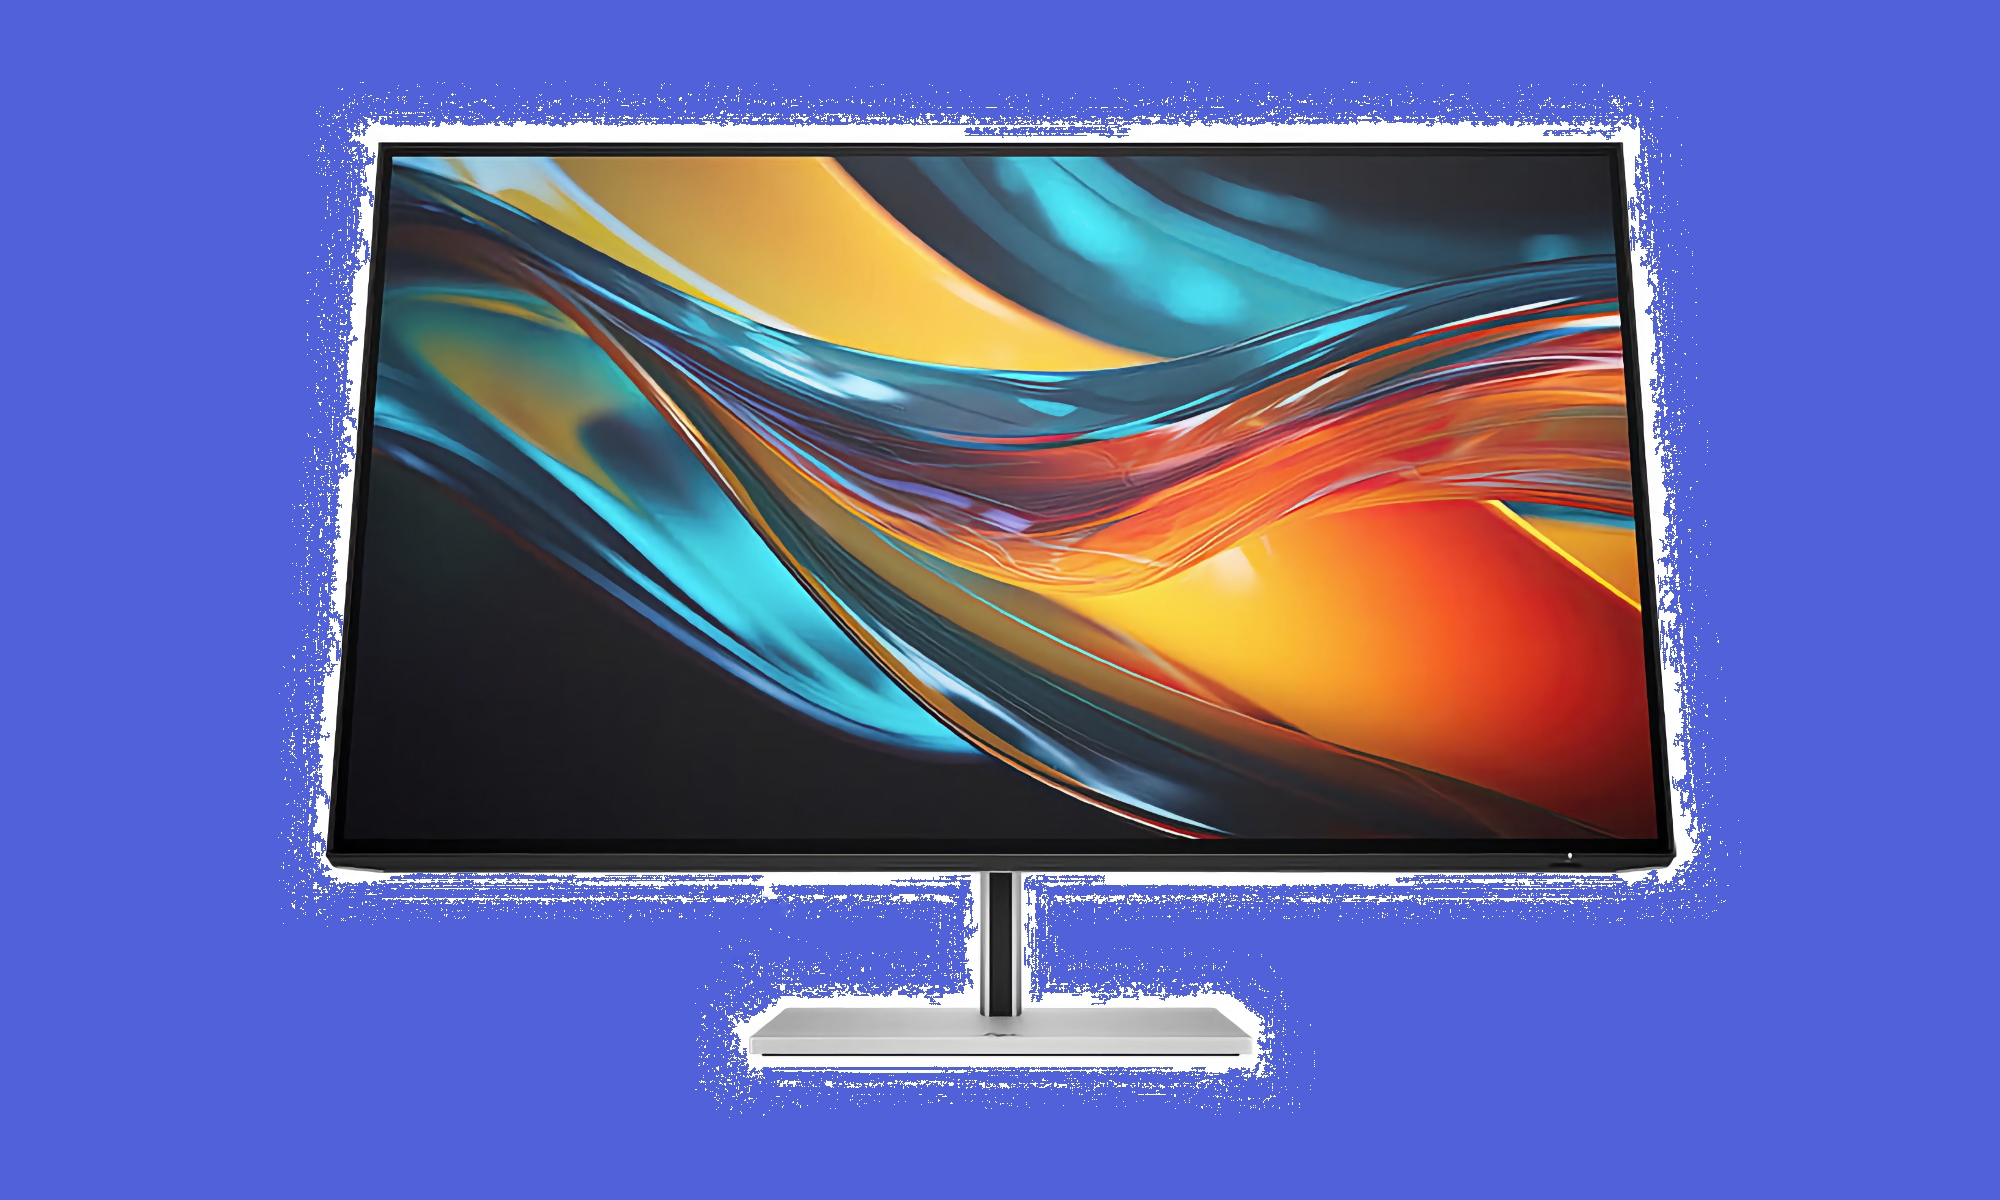 HP has started selling the Series 7 Pro (732PK): 4K monitor with Thunderbolt 4 and KVM switch for $966